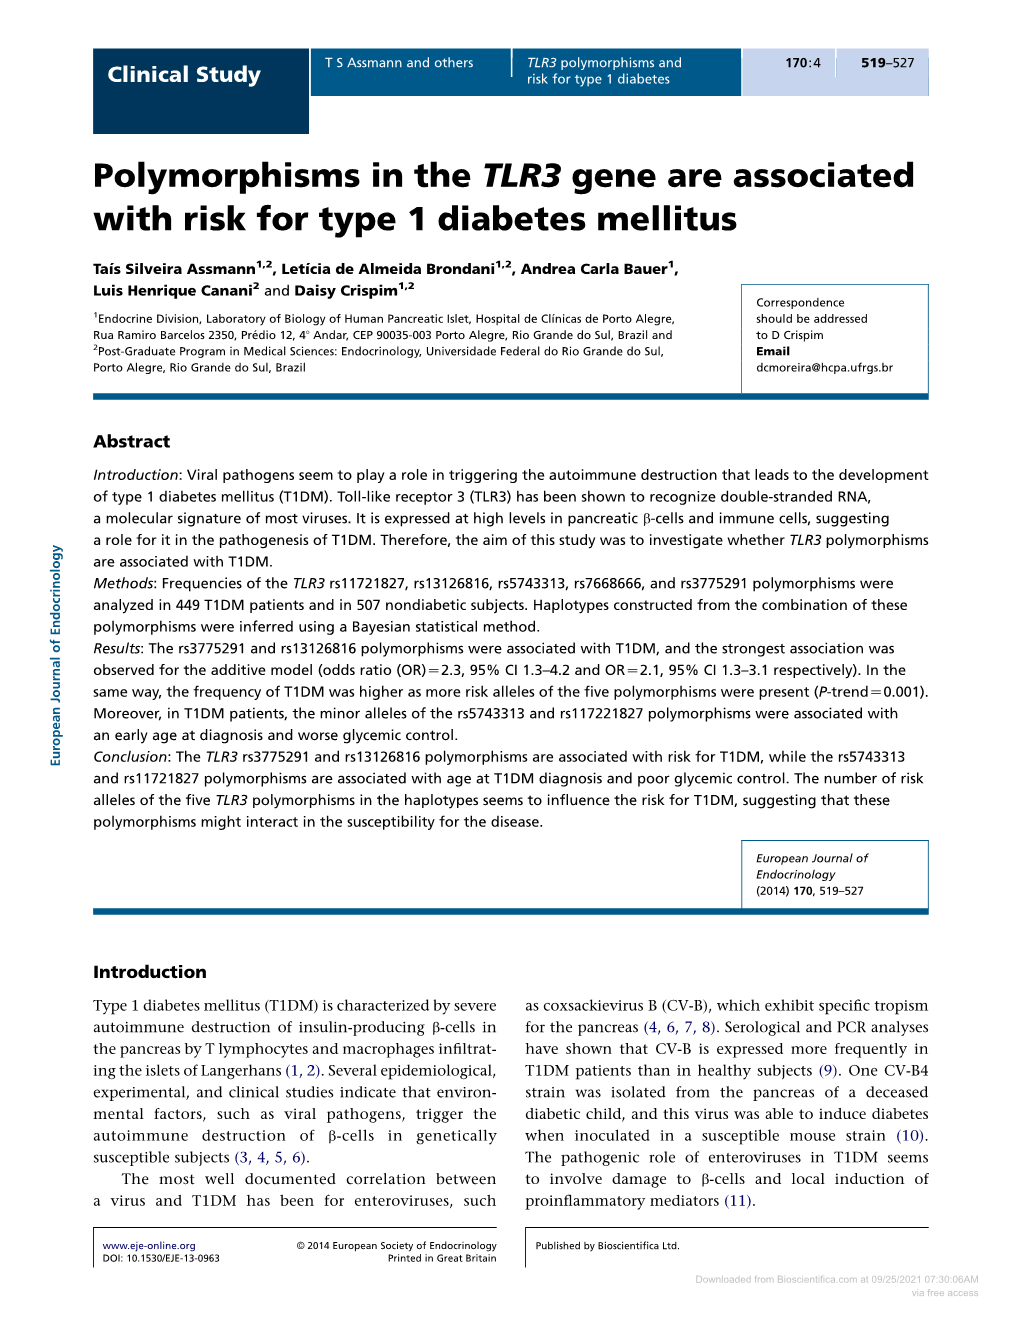 Polymorphisms in the TLR3 Gene Are Associated with Risk for Type 1 Diabetes Mellitus